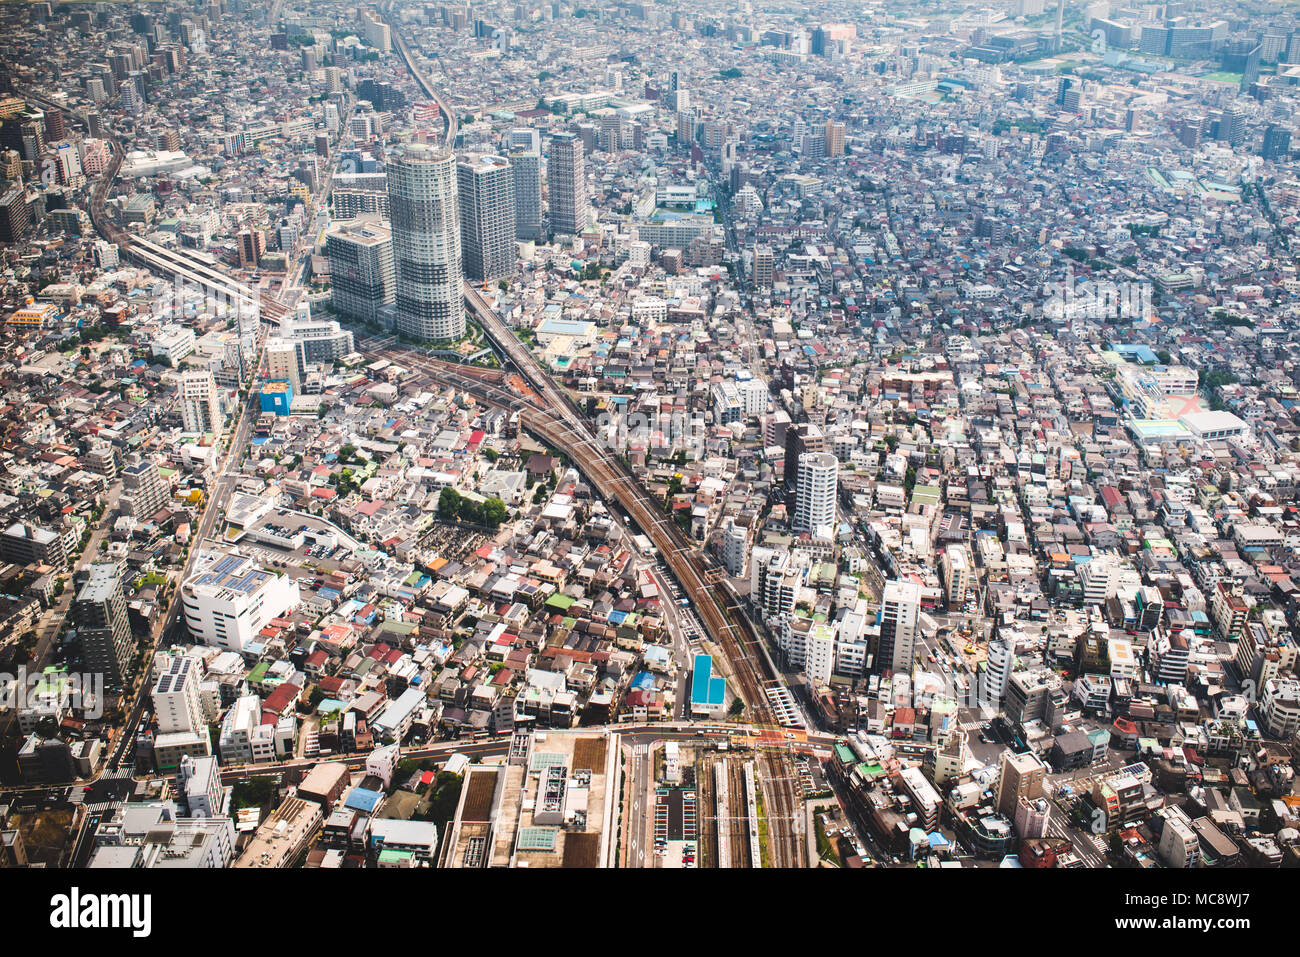 Japanese life, landscapes and temples Photo: Alessandro Bosio/Alamy Stock Photo